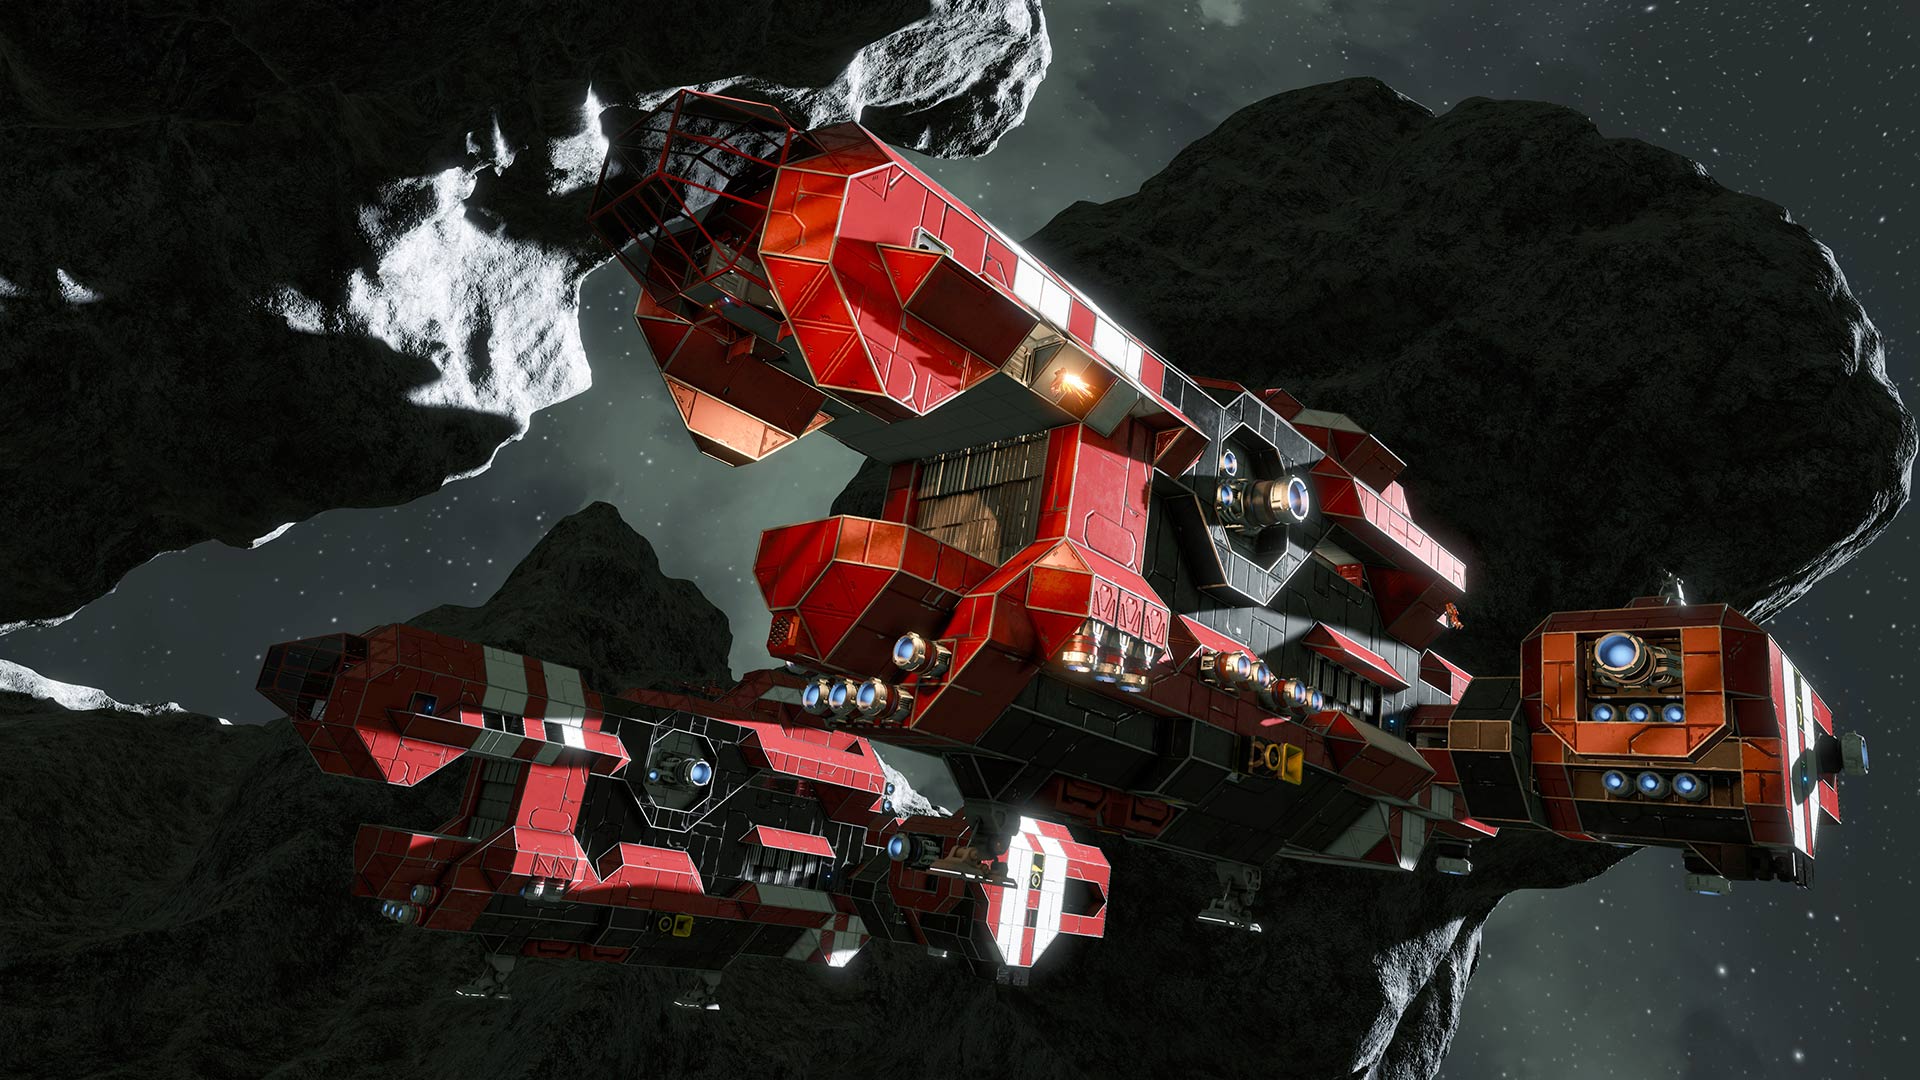 HD wallpaper featuring space engineers with futuristic spacecraft near an asteroid for desktop background.